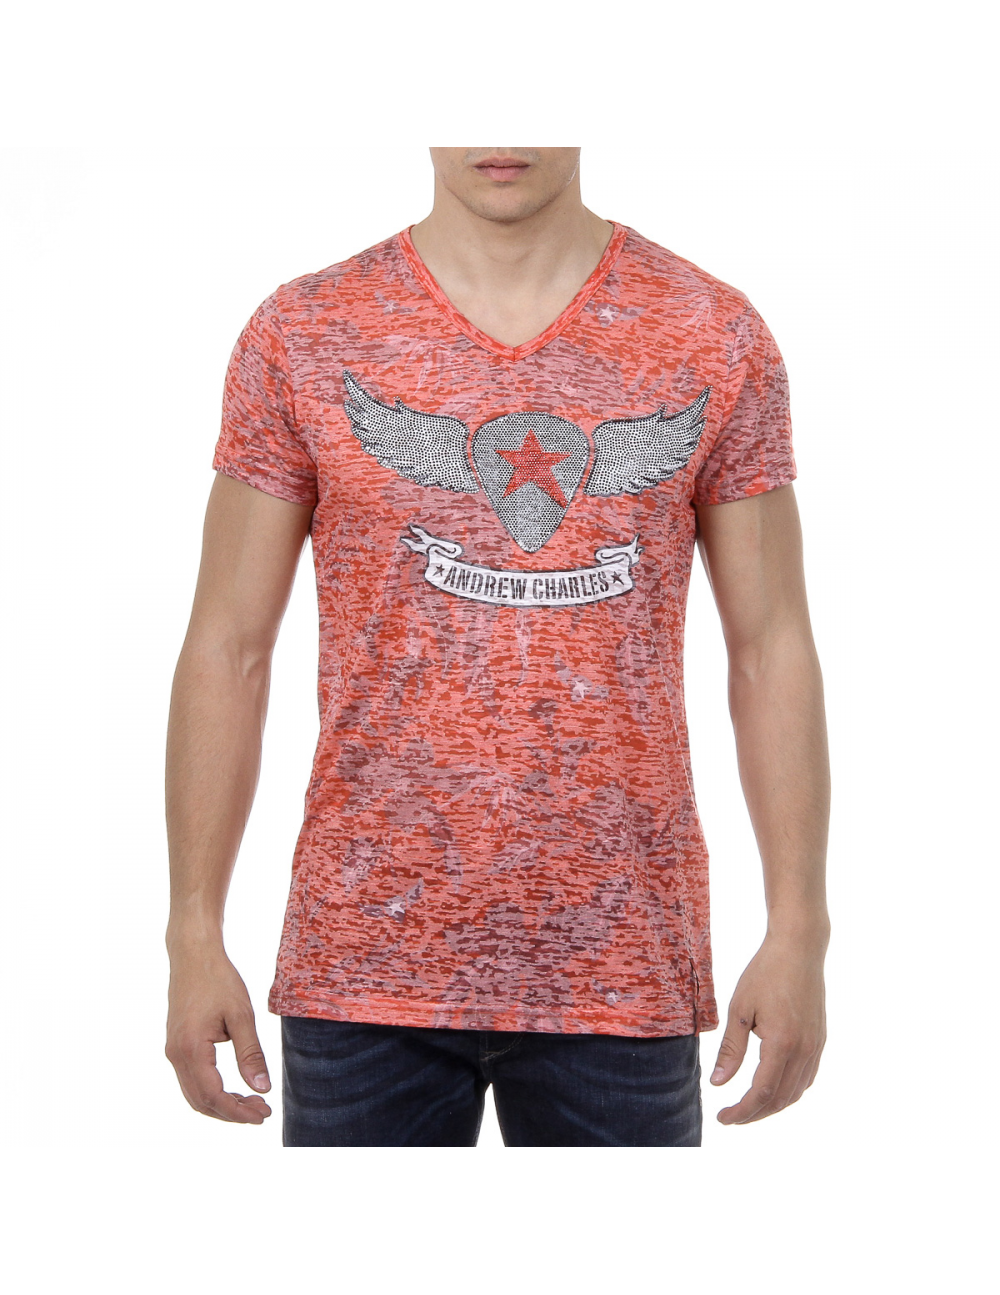 Andrew Charles Mens T-Shirt Short Sleeves V-Neck Red ISAAC - YuppyCollections